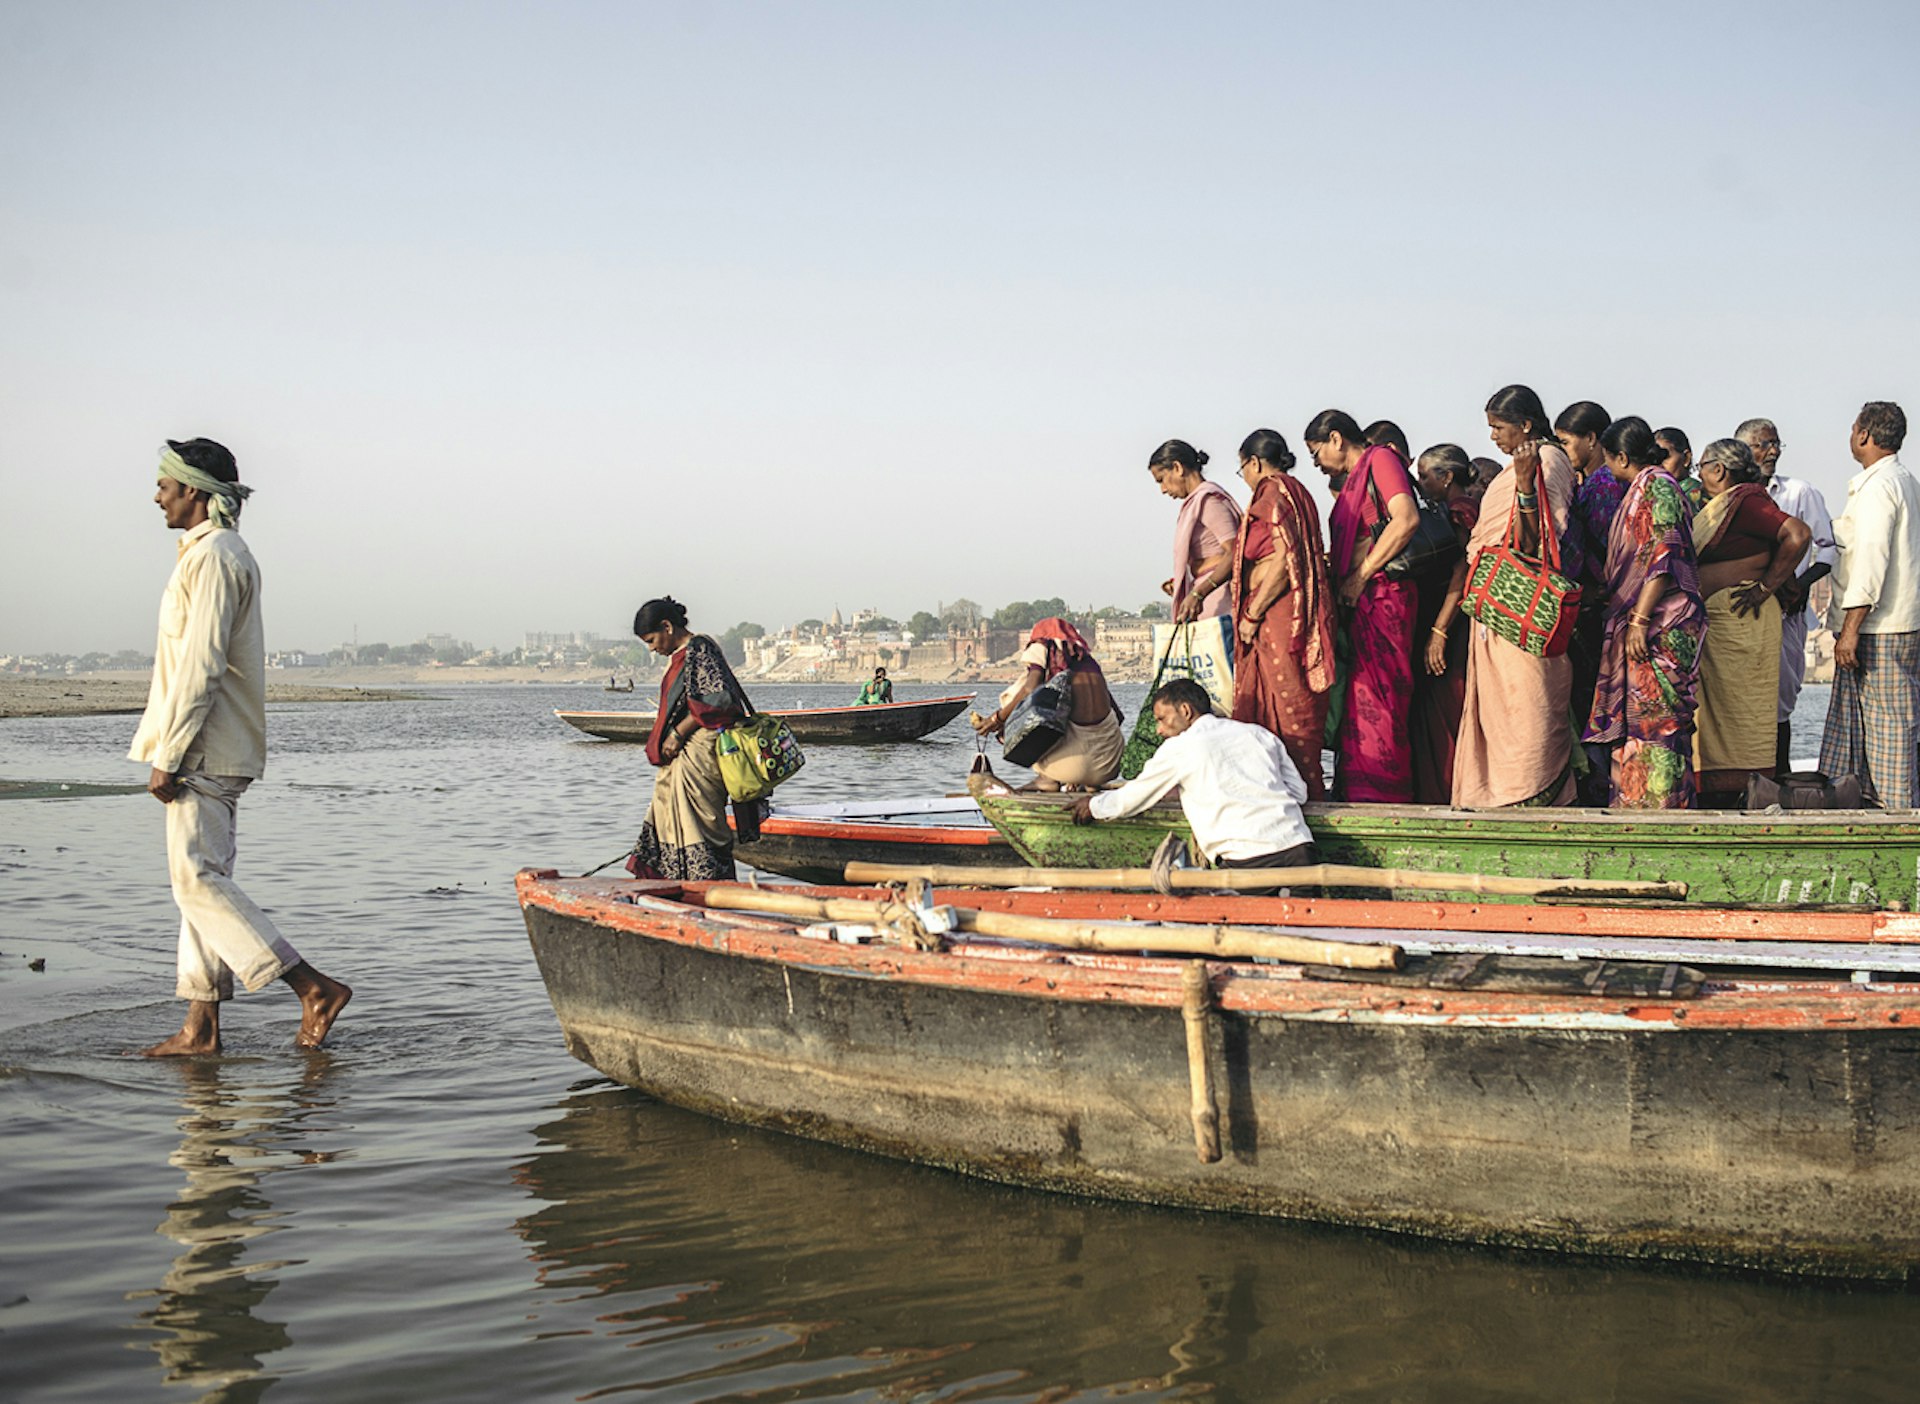 The Travel Diary: Getting lost in Varanasi, the spiritual capital of India